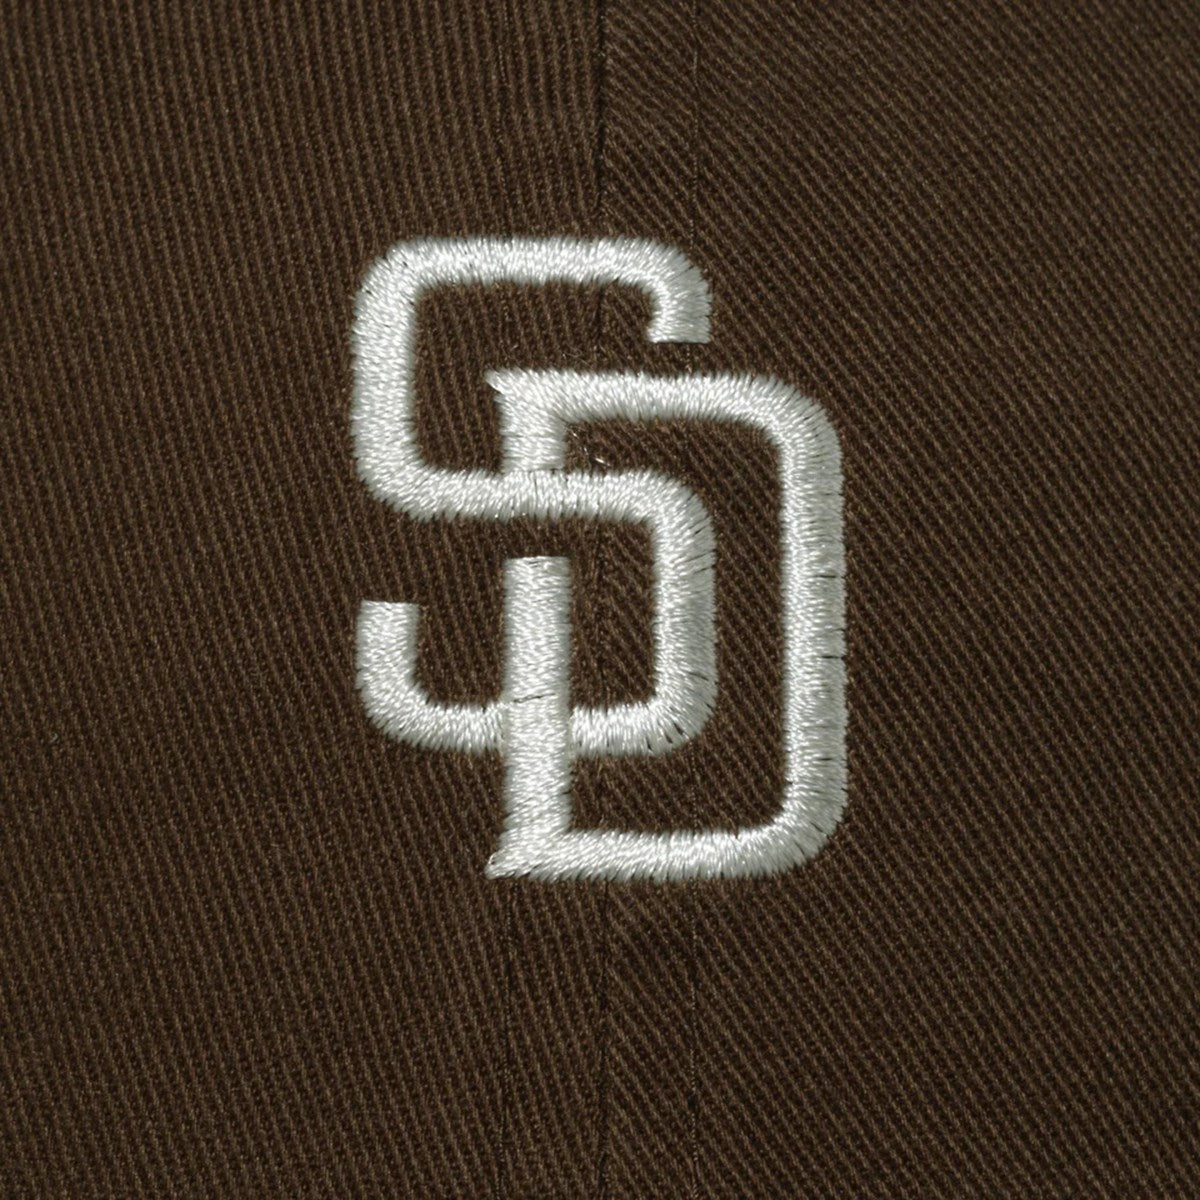 NEW ERA San Diego Padres - Casual Classic MID LOGO WAL CRM [14109506]